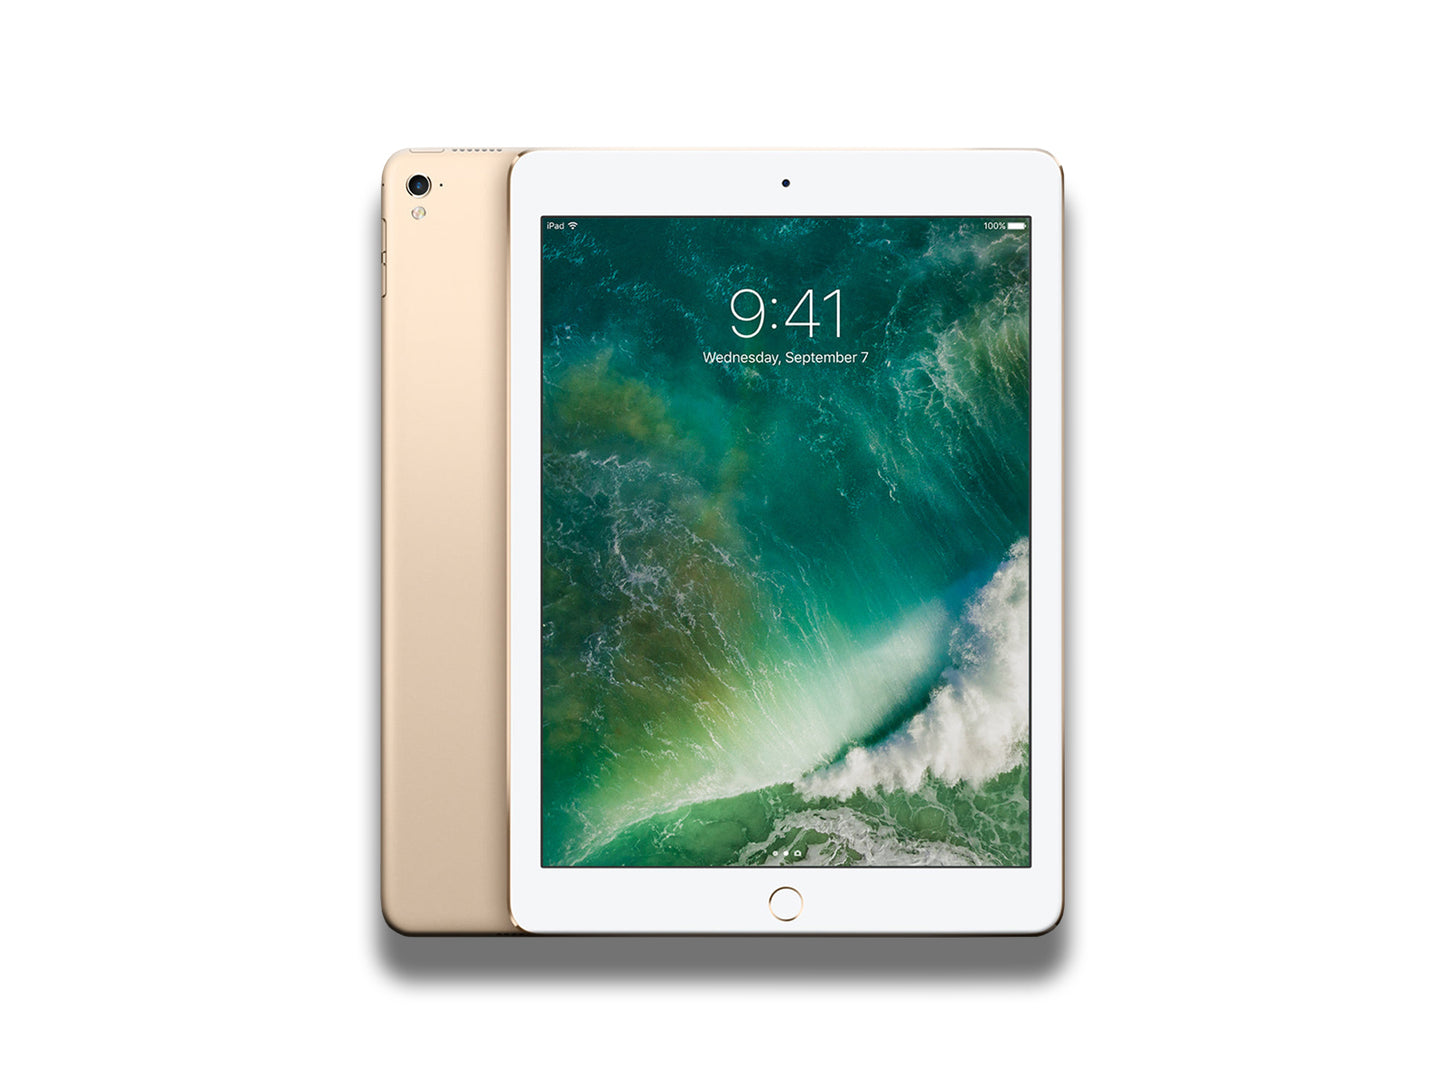 Apple iPad Pro 9.7" 2016 In Gold Front And Back